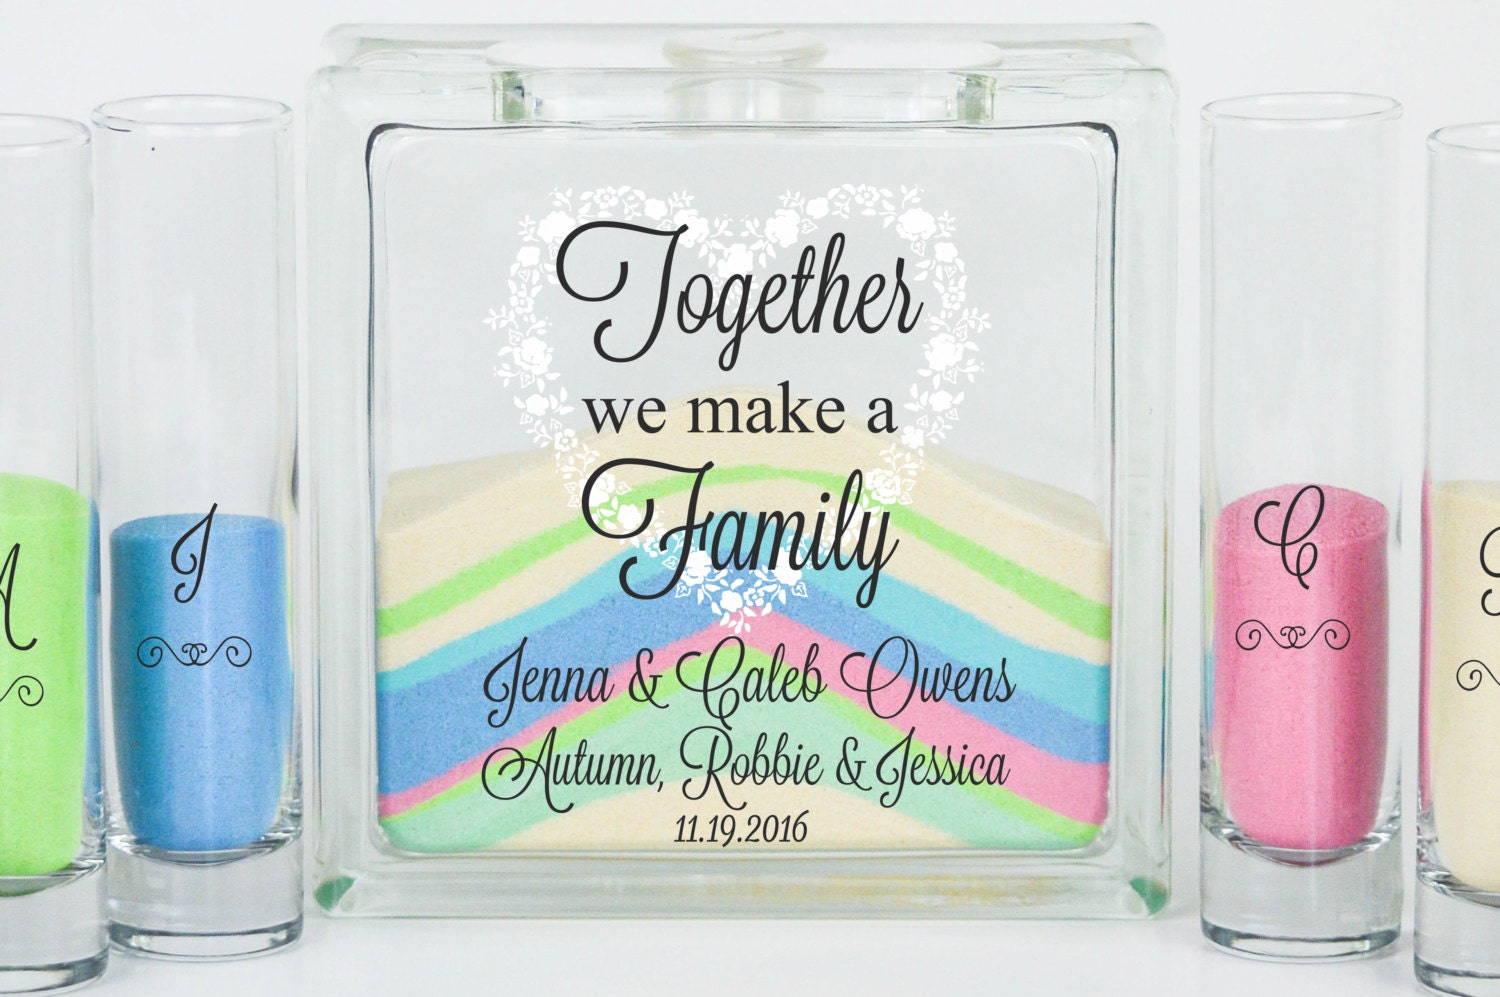 Blended Family Wedding Sand Ceremony Kit, Unity Candle Alternative, Together We Make A Family, Gift